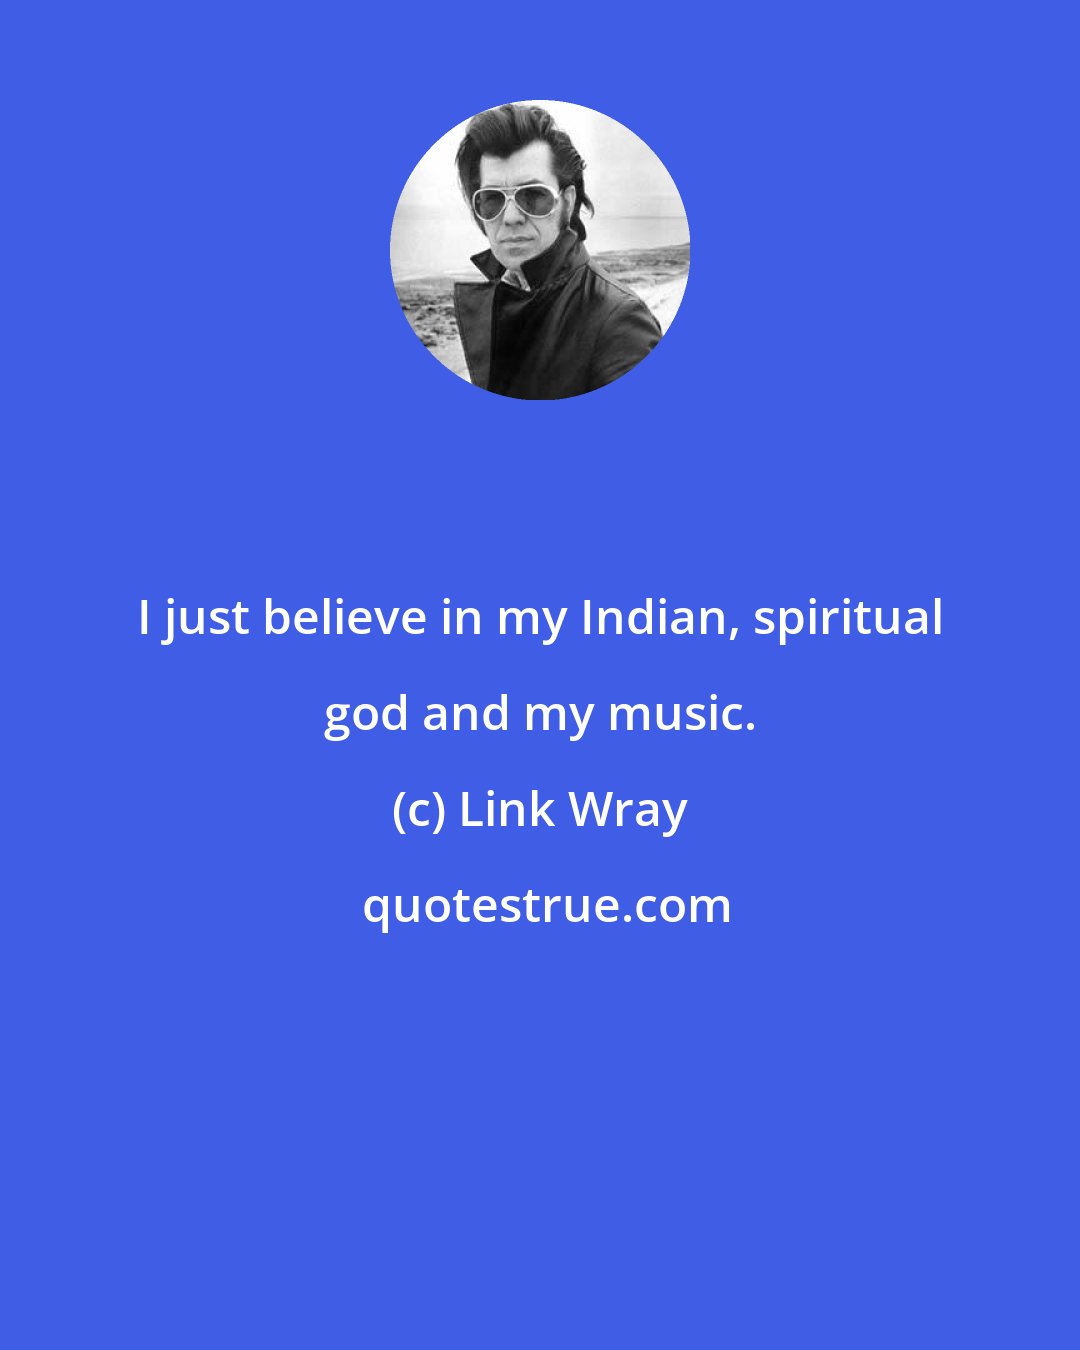 Link Wray: I just believe in my Indian, spiritual god and my music.